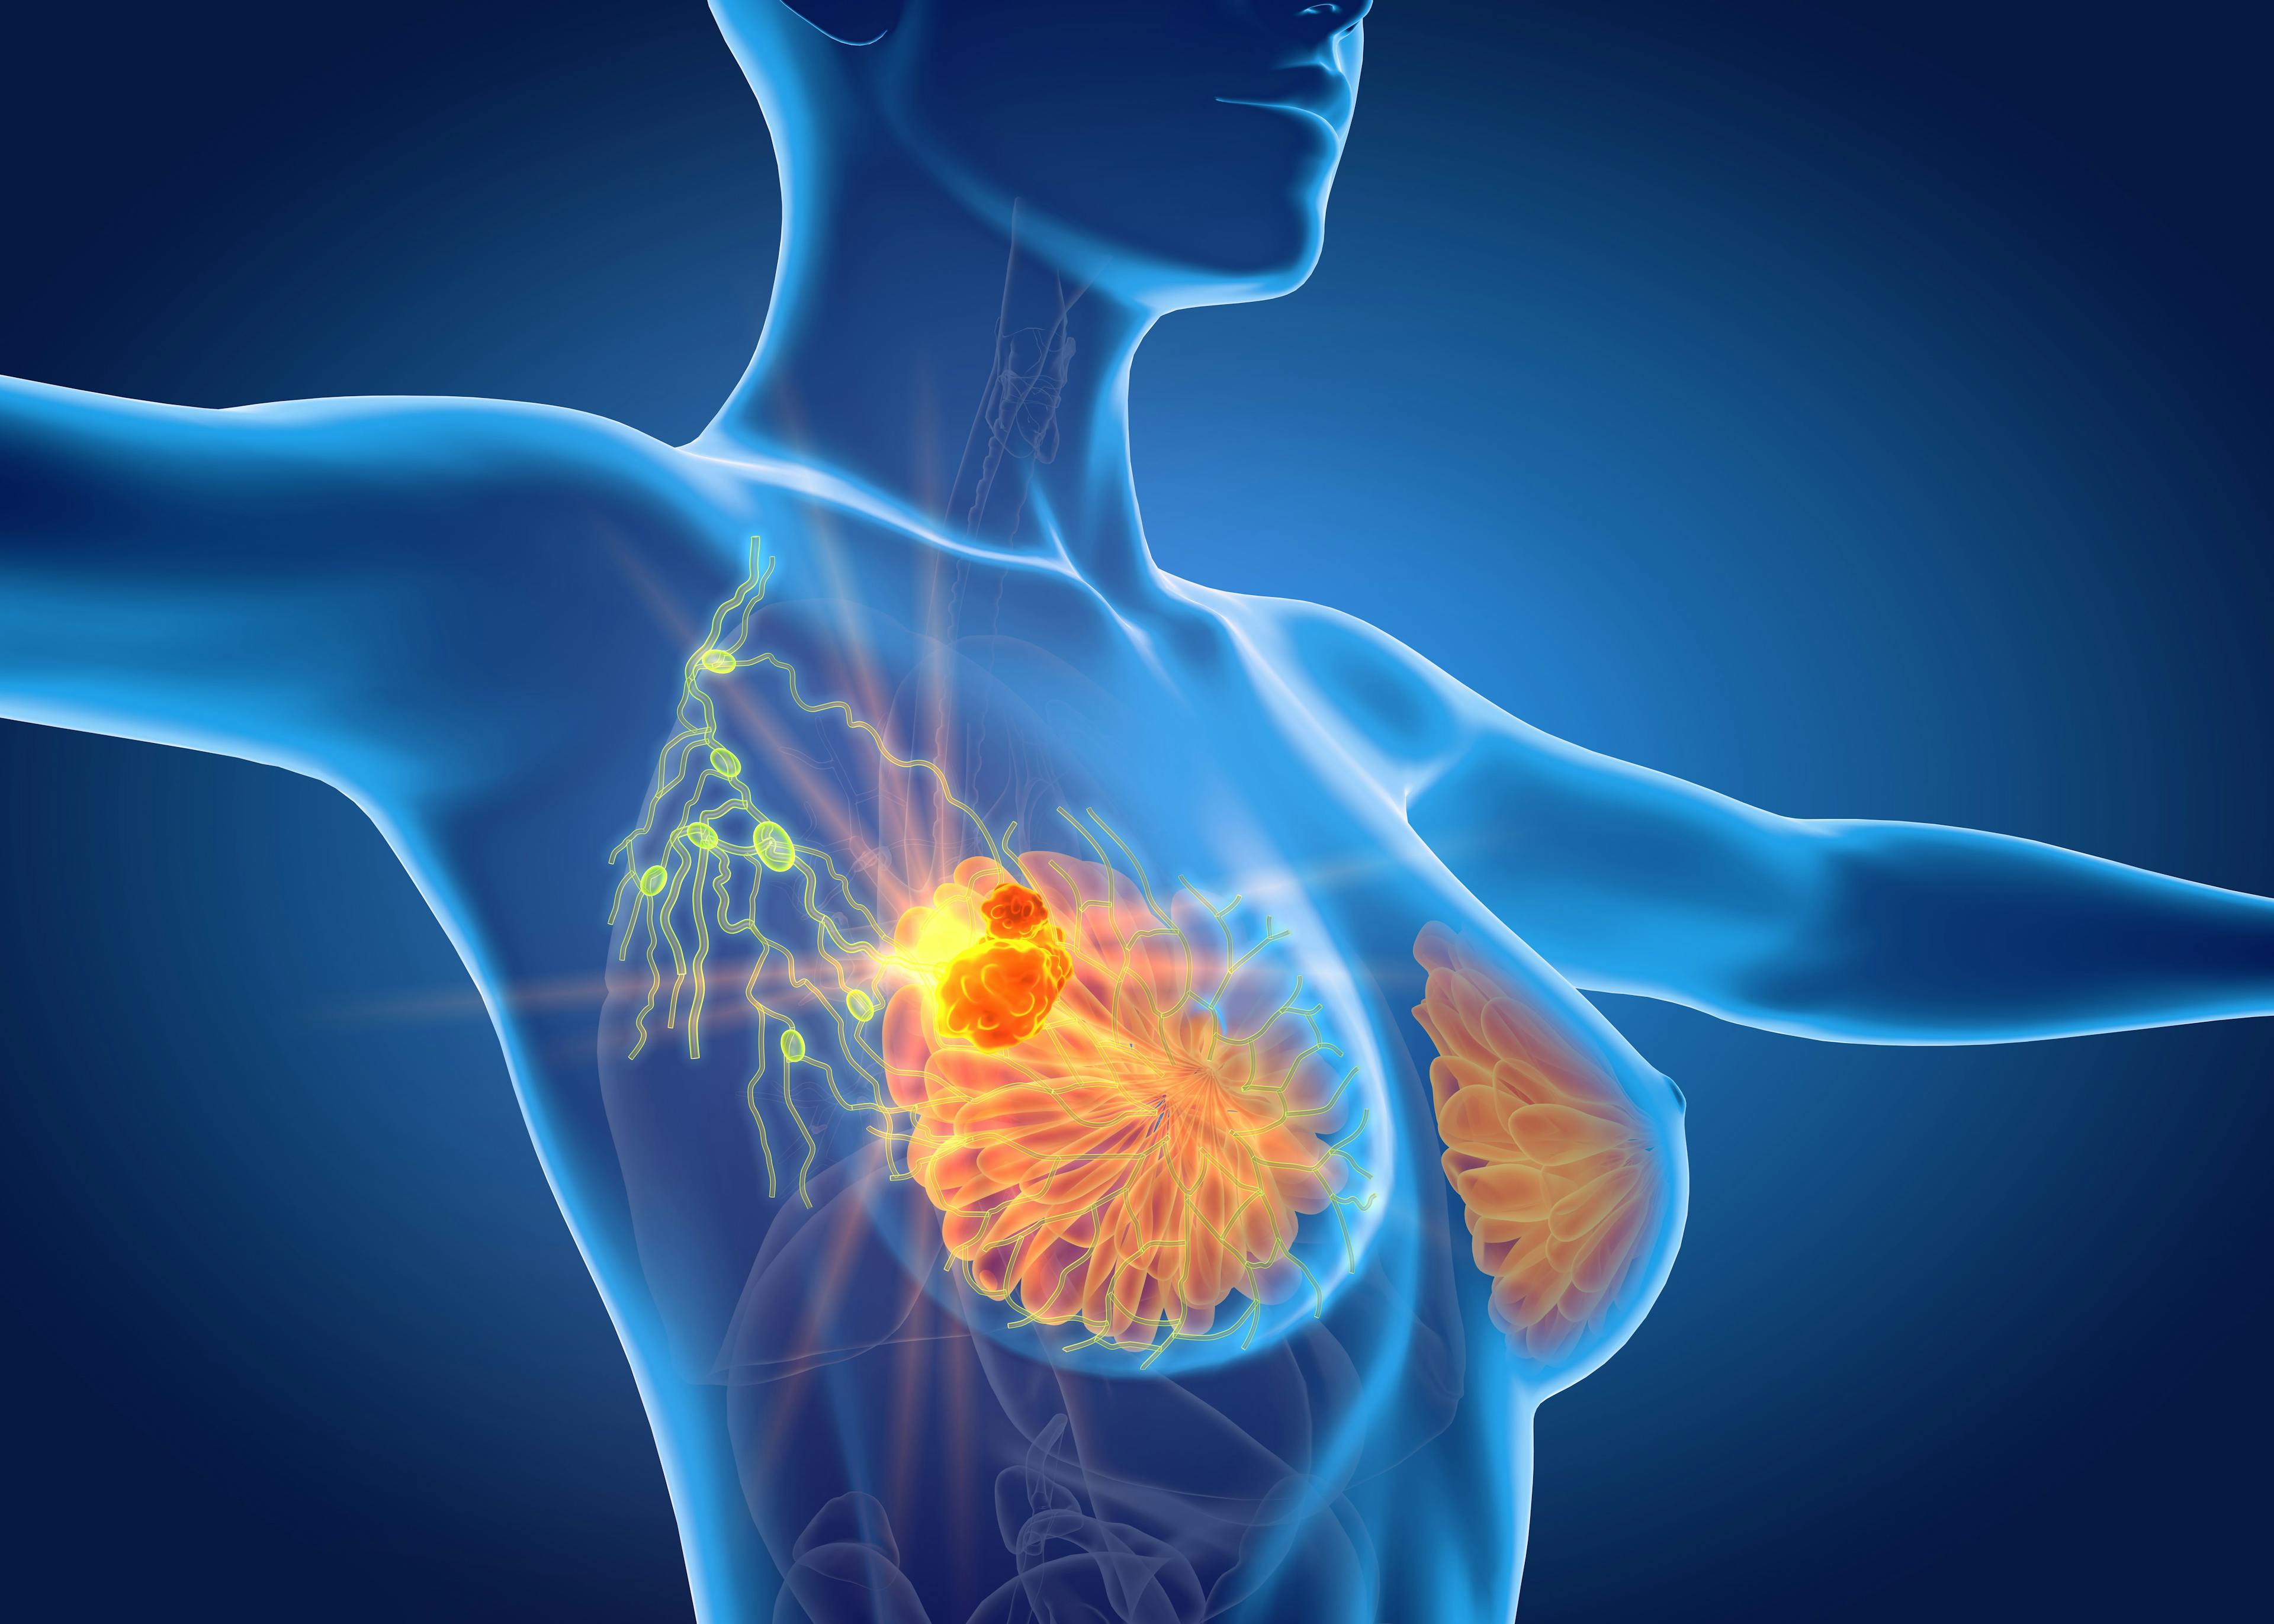 Drug Combination With Metformin Showed Positive Activity and Safety for Patients with HER2-Positive Breast Cancer